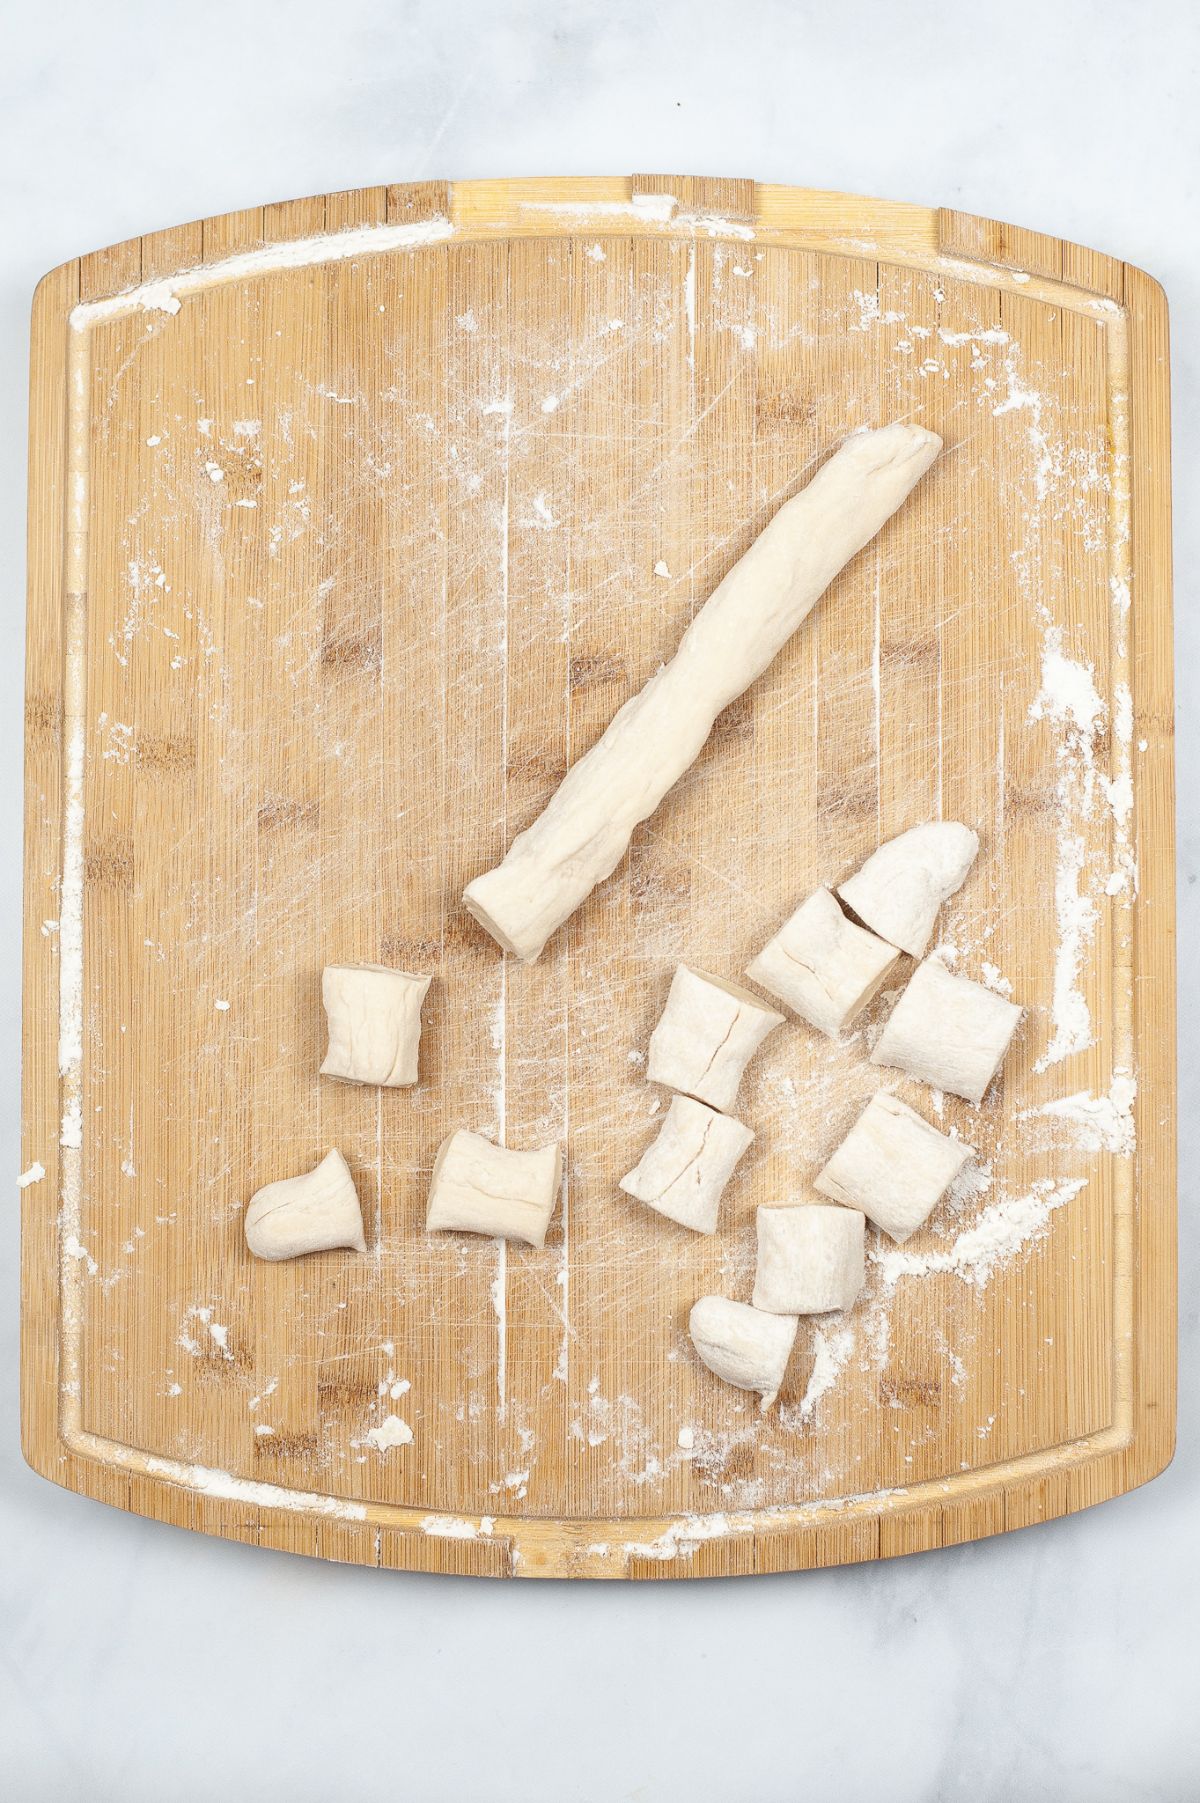 dough rolled into ropes and some cut pieces on a wooden cutting board